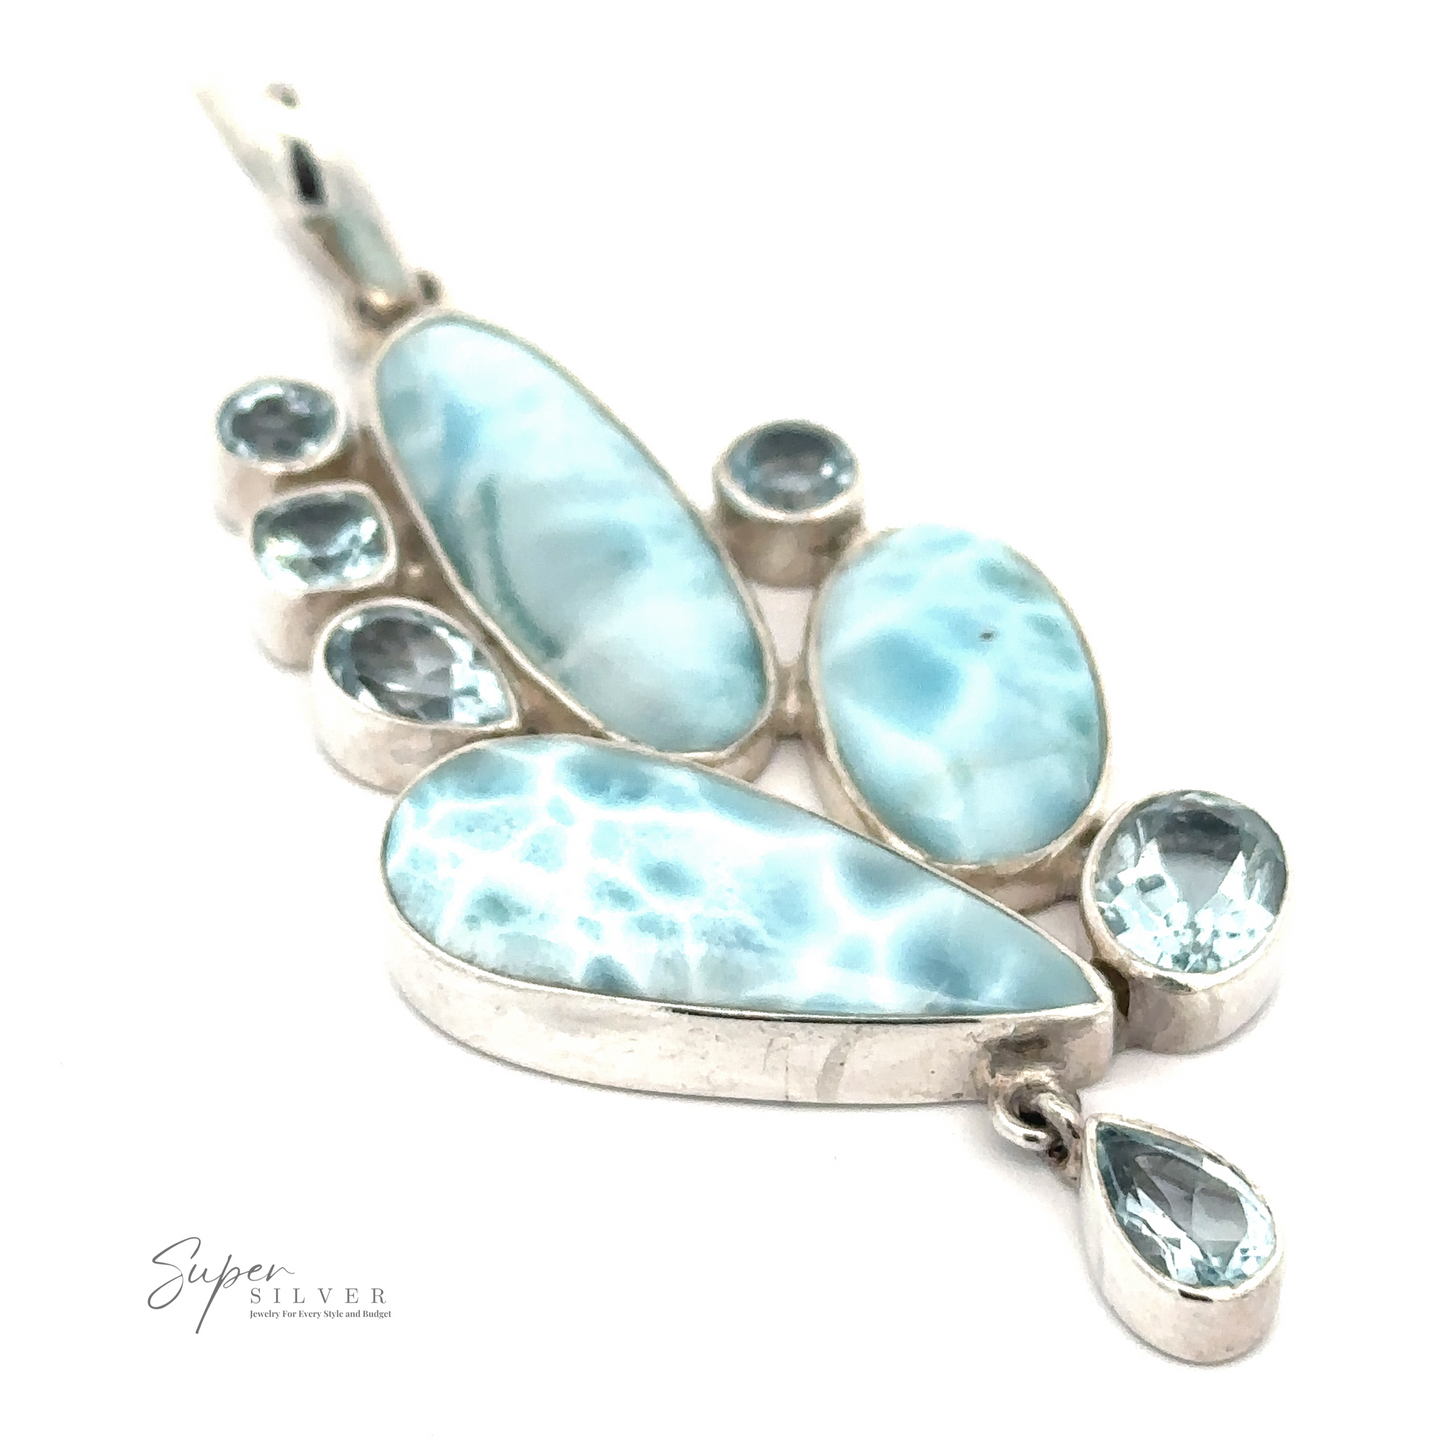 A Beautiful Larimar and Blue Topaz Pendant featuring multiple light blue gems of varying sizes and shapes, with the text "Super Silver" in the lower left corner.